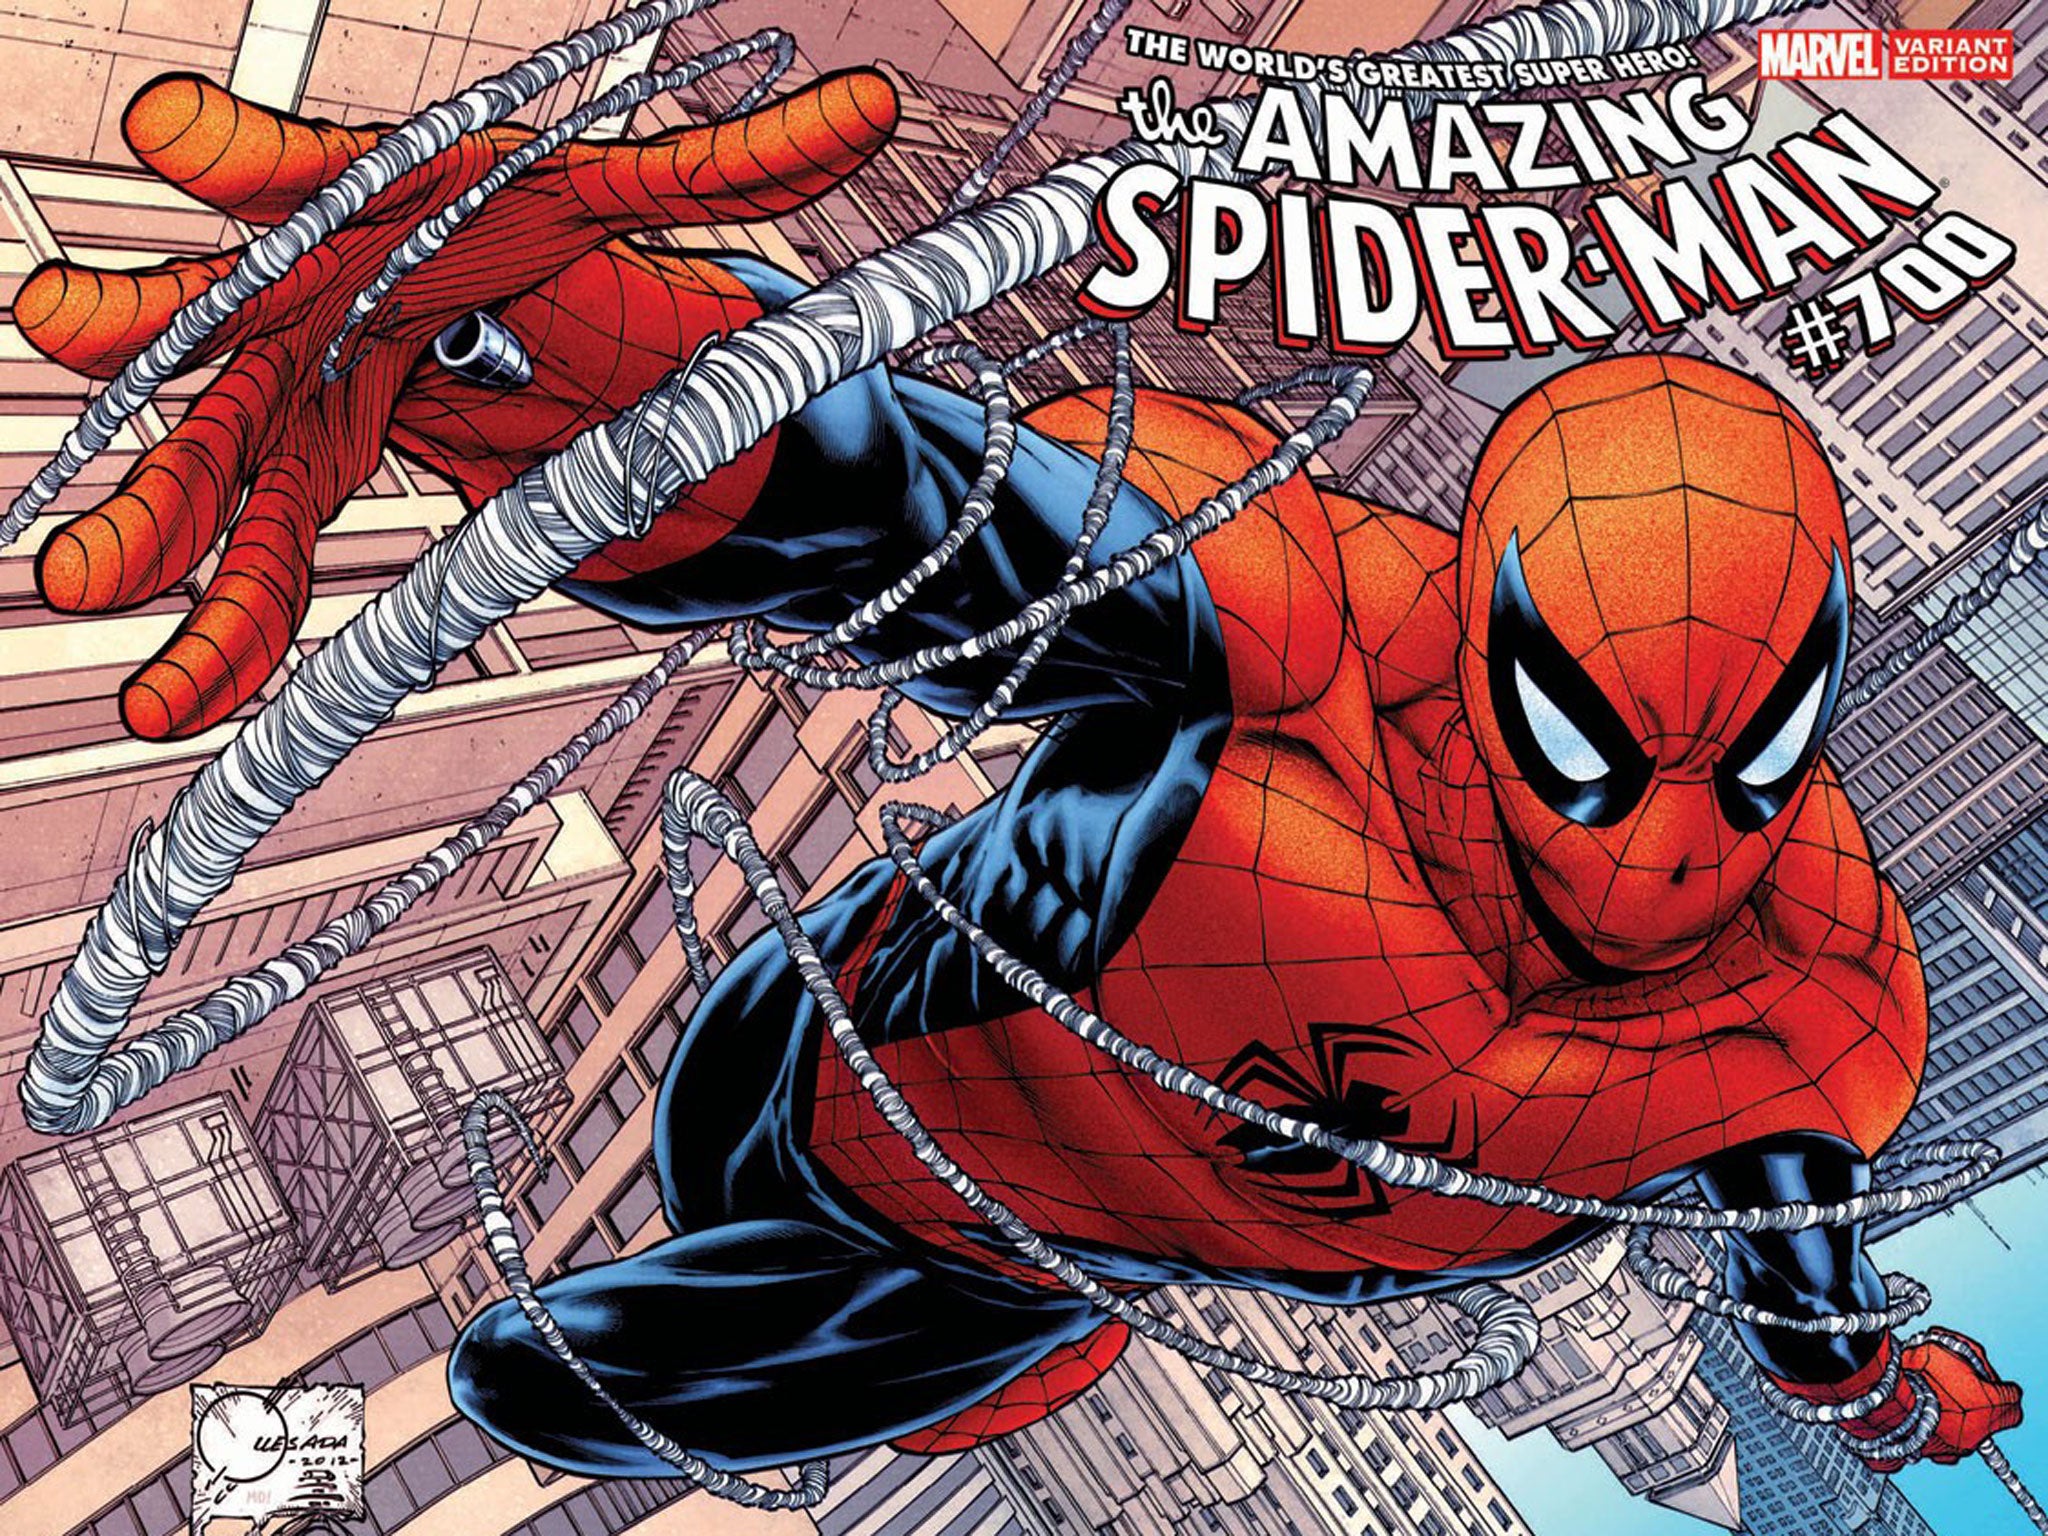 The 700th and final issue of The Amazing Spider-Man saw Peter Parker locked in a battle to the death with arch-villain Otto Octavius